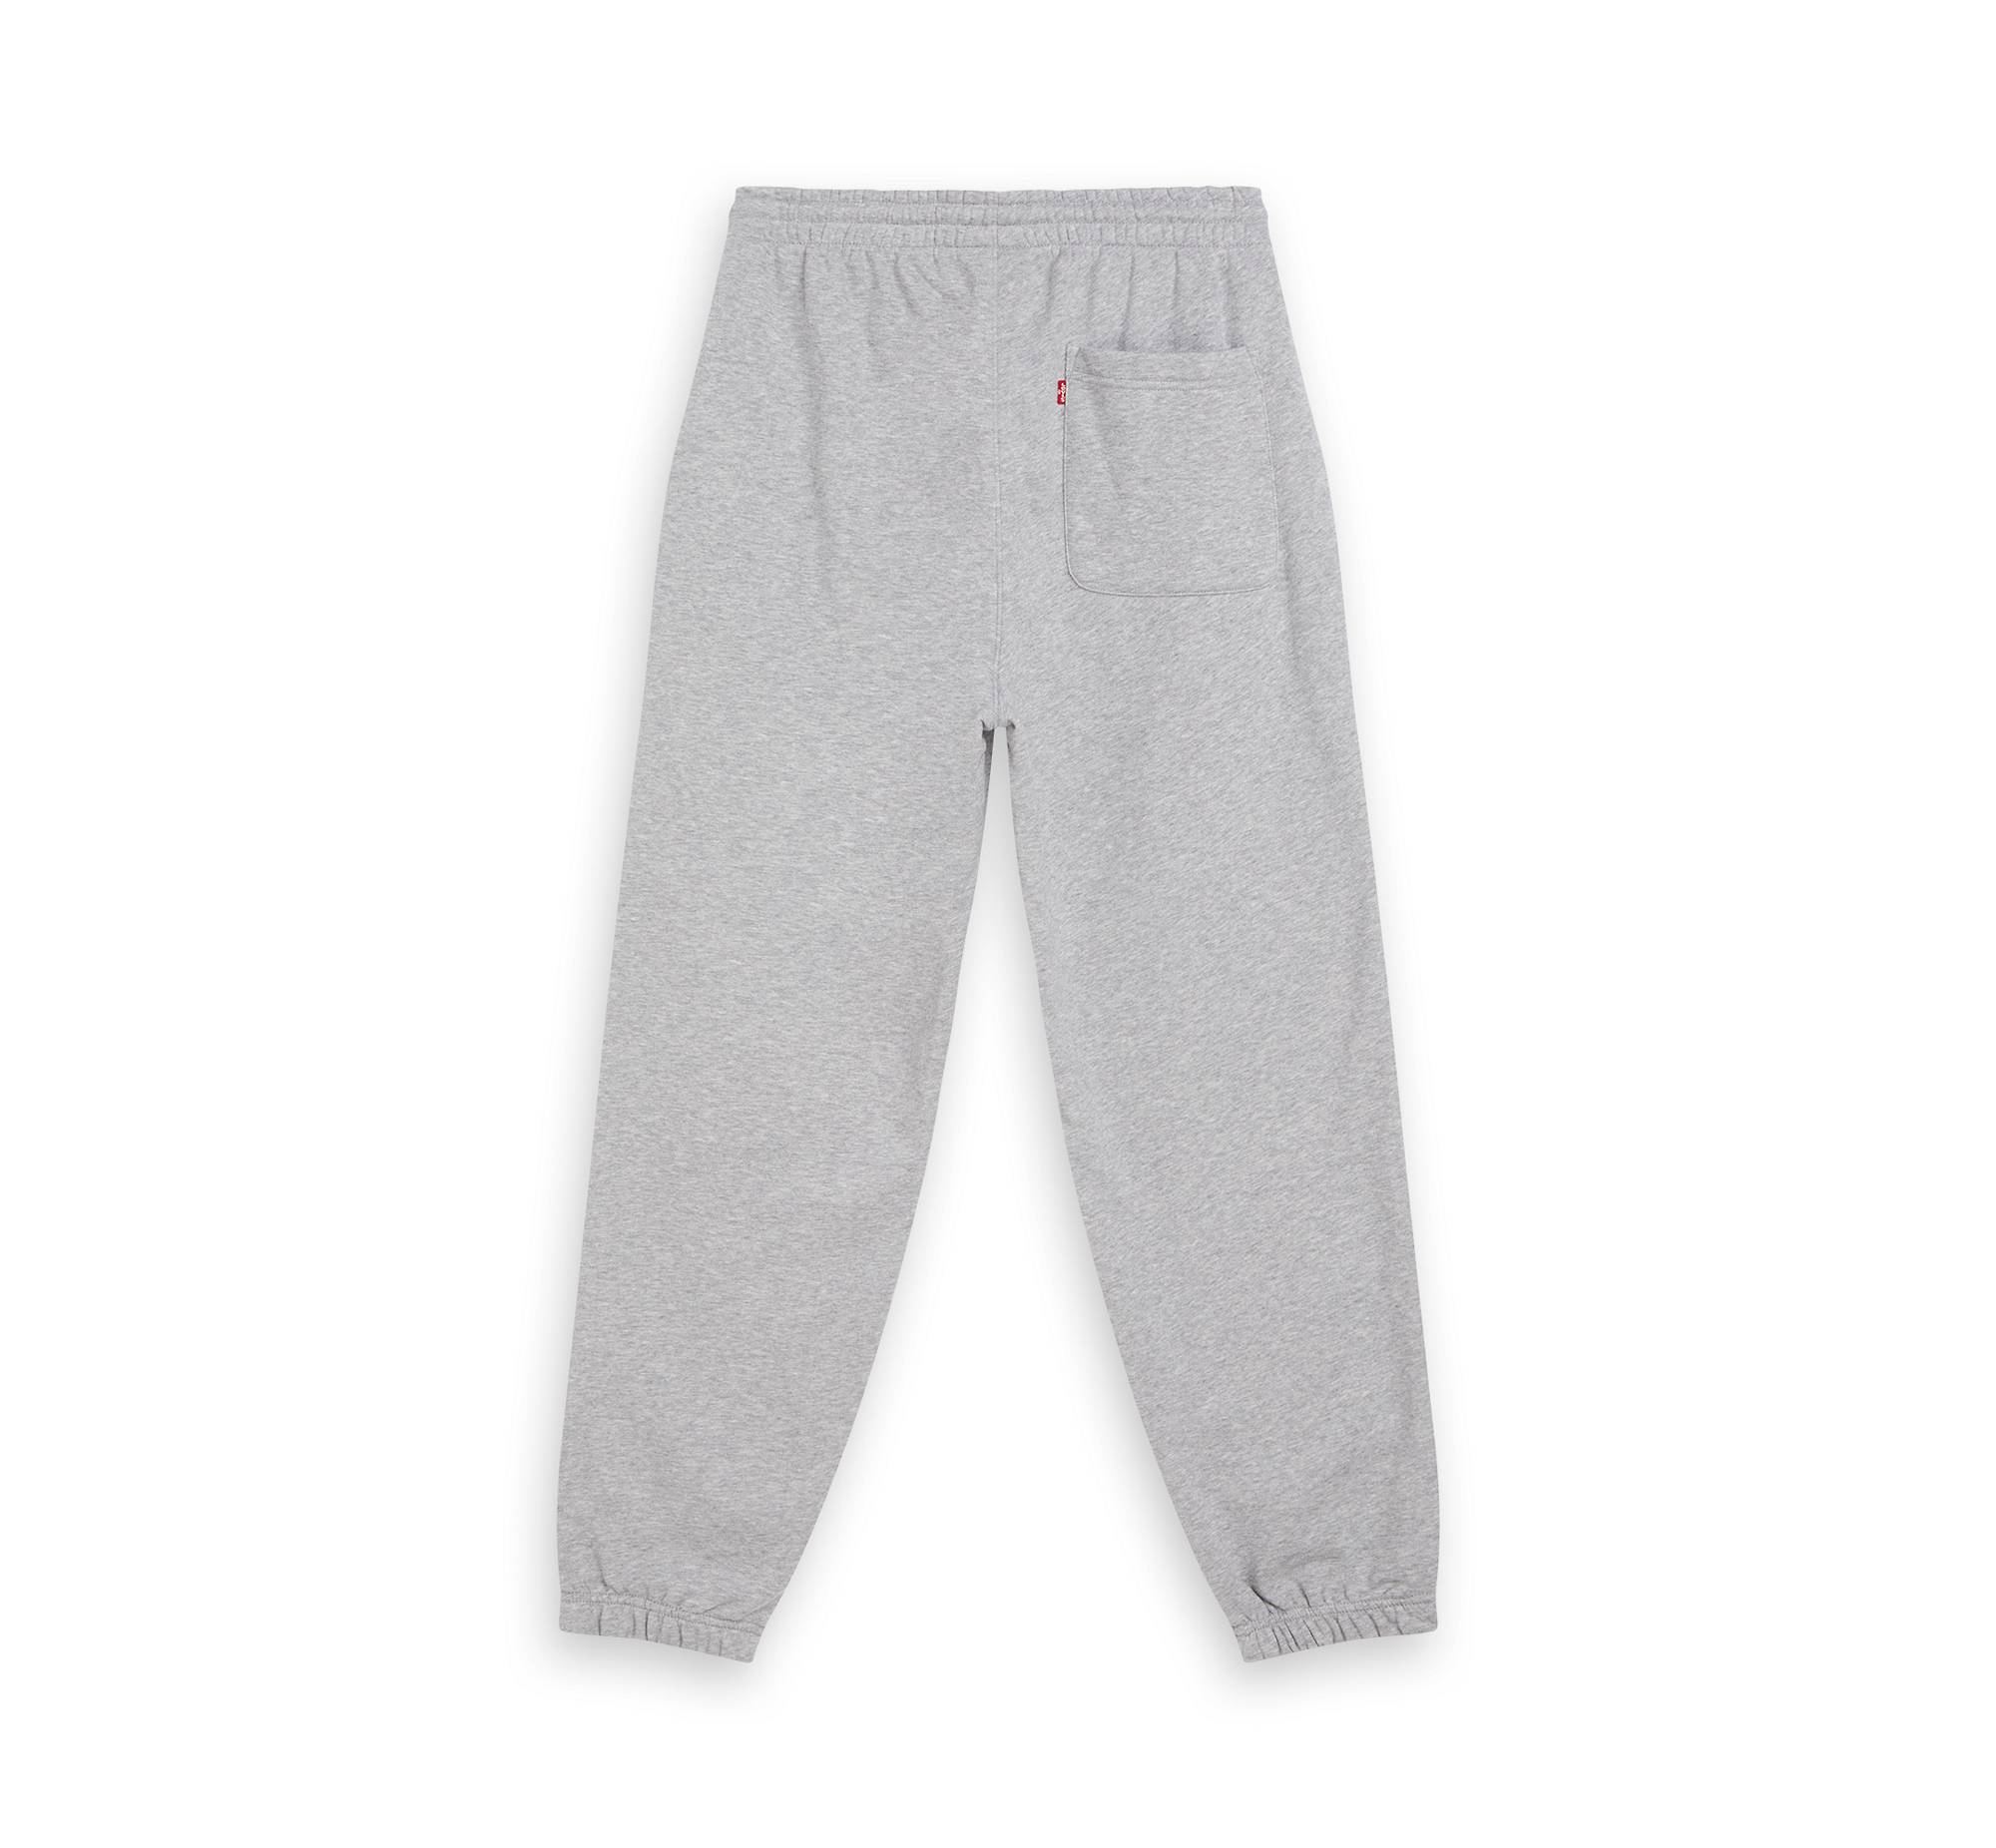 Graphic Piping Sweatpant 5